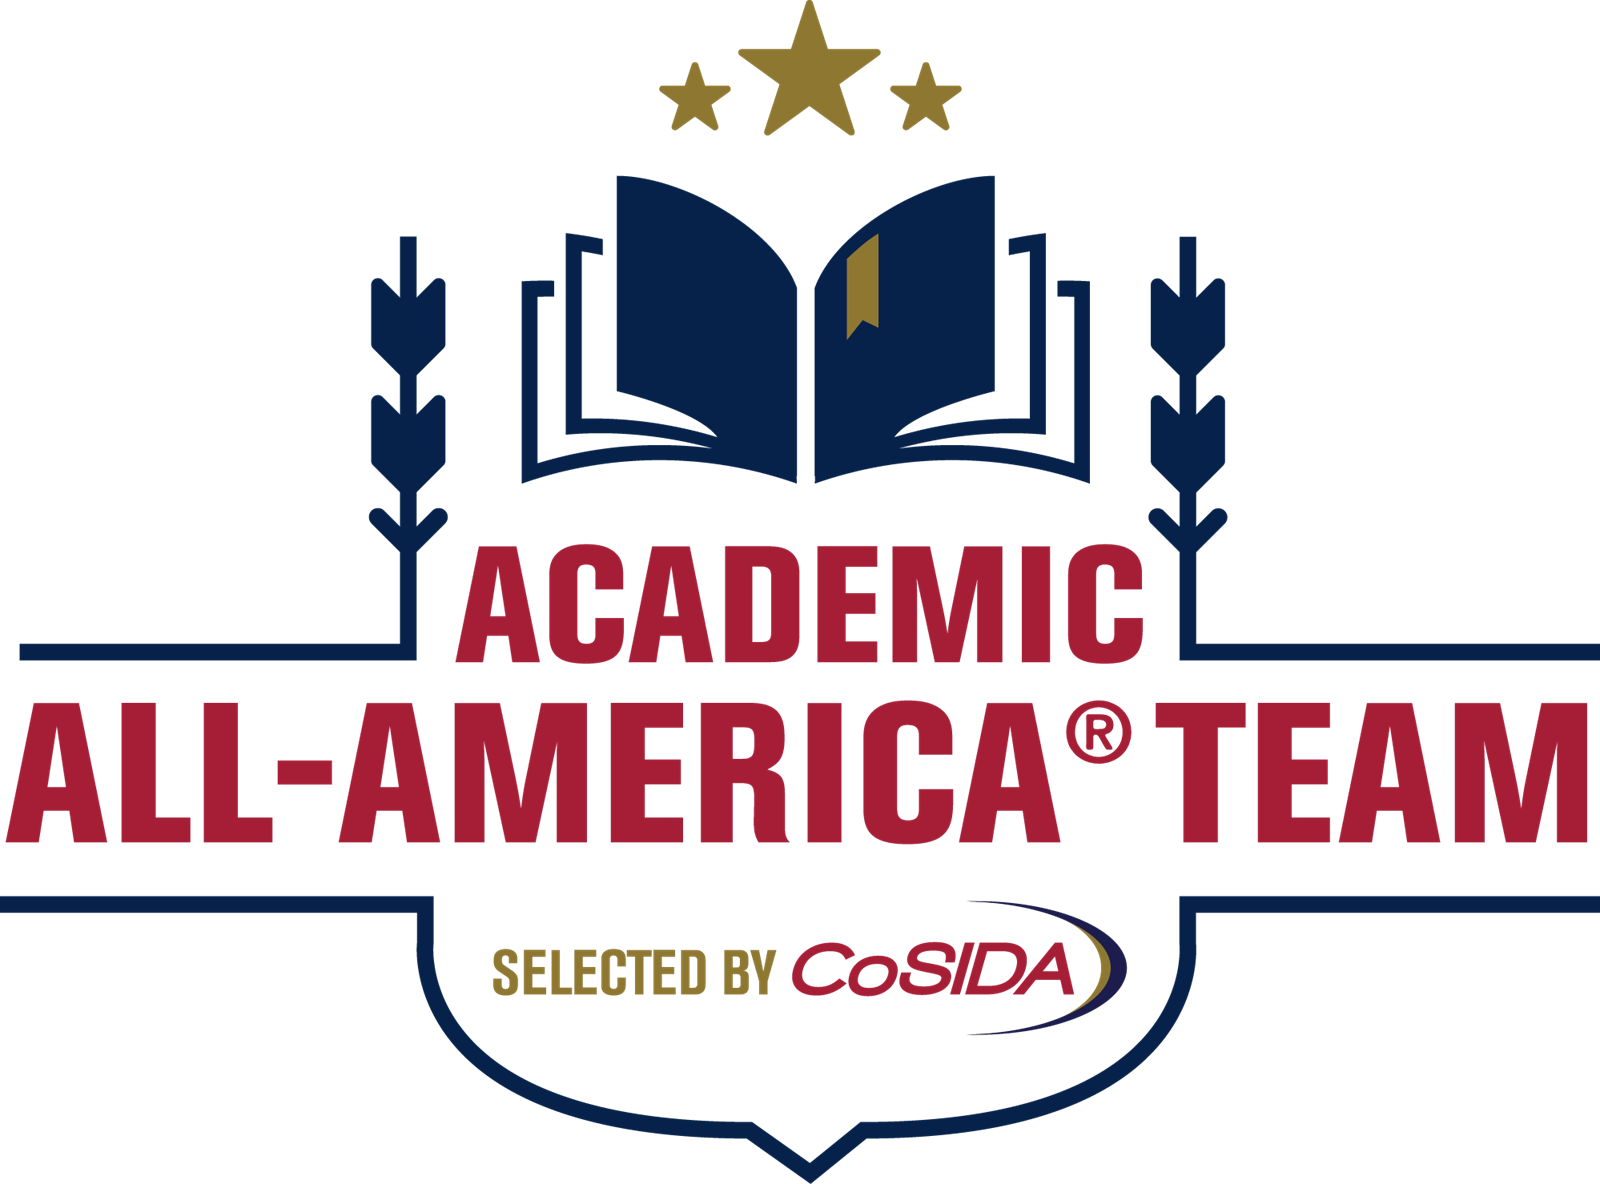 Two ECFC Student Athletes Selected as Academic All-Americans